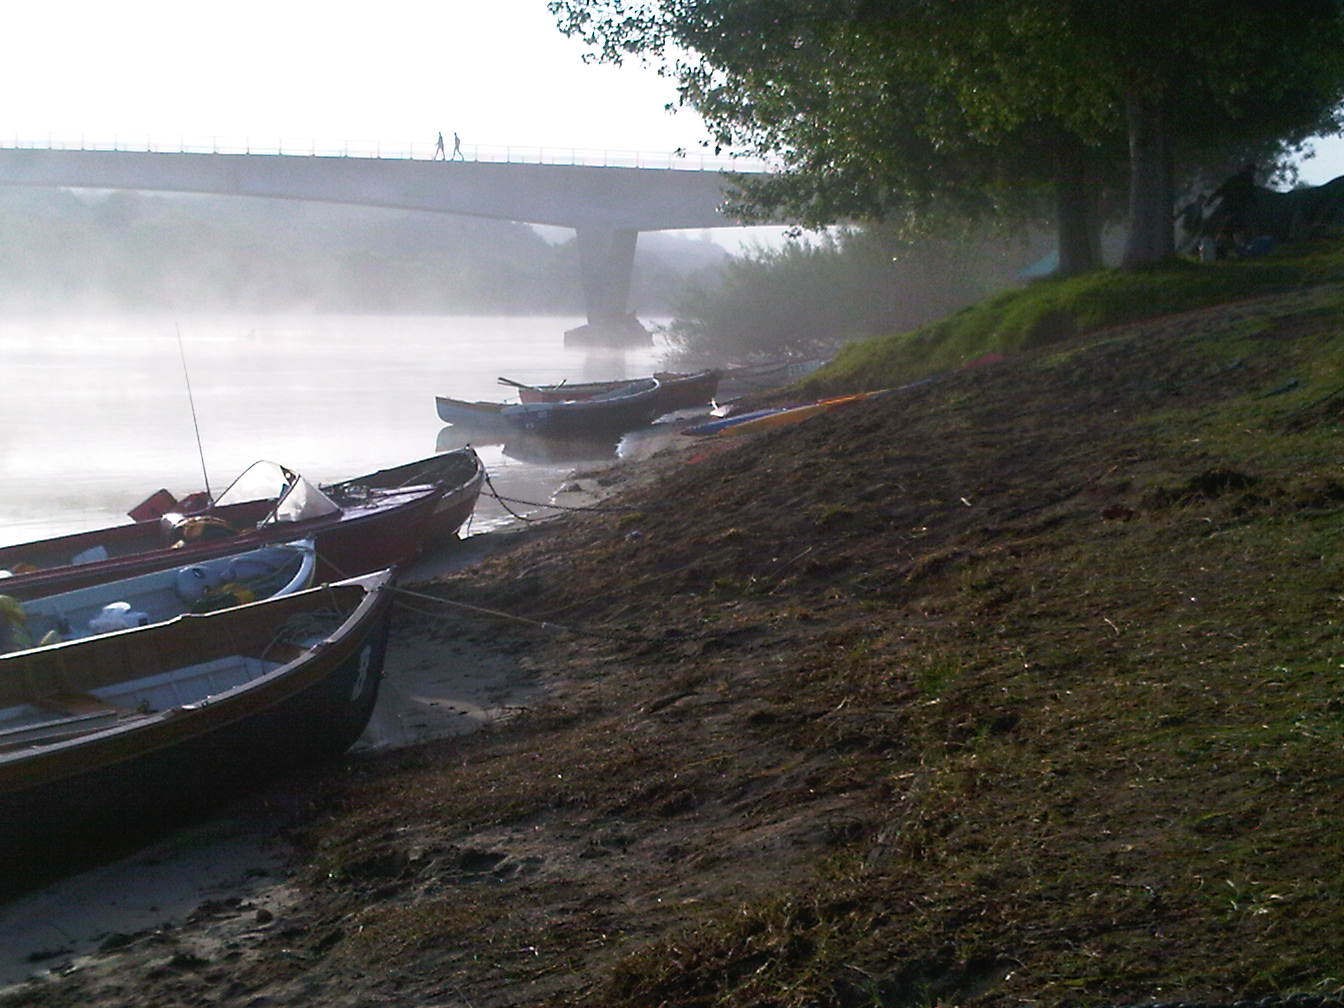 A misty morning shrouds the cutters